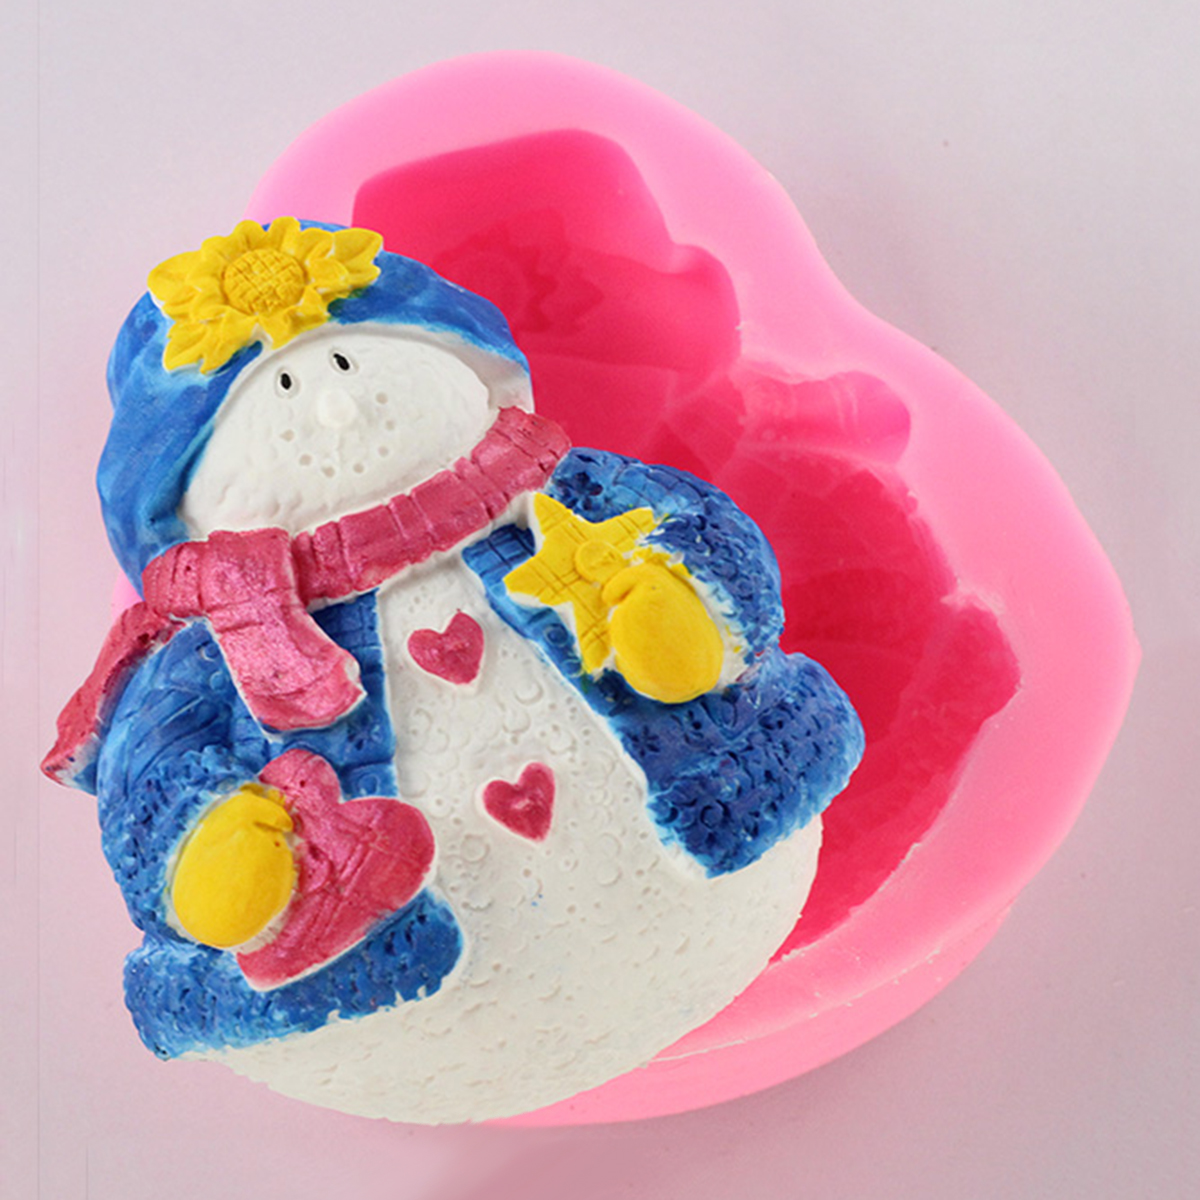 3D-Snowman-Silicone-Candle-Cake-Mold-Soap-Craft-Handmade-Decorating-Baking-Mold-Tools-1382540-11